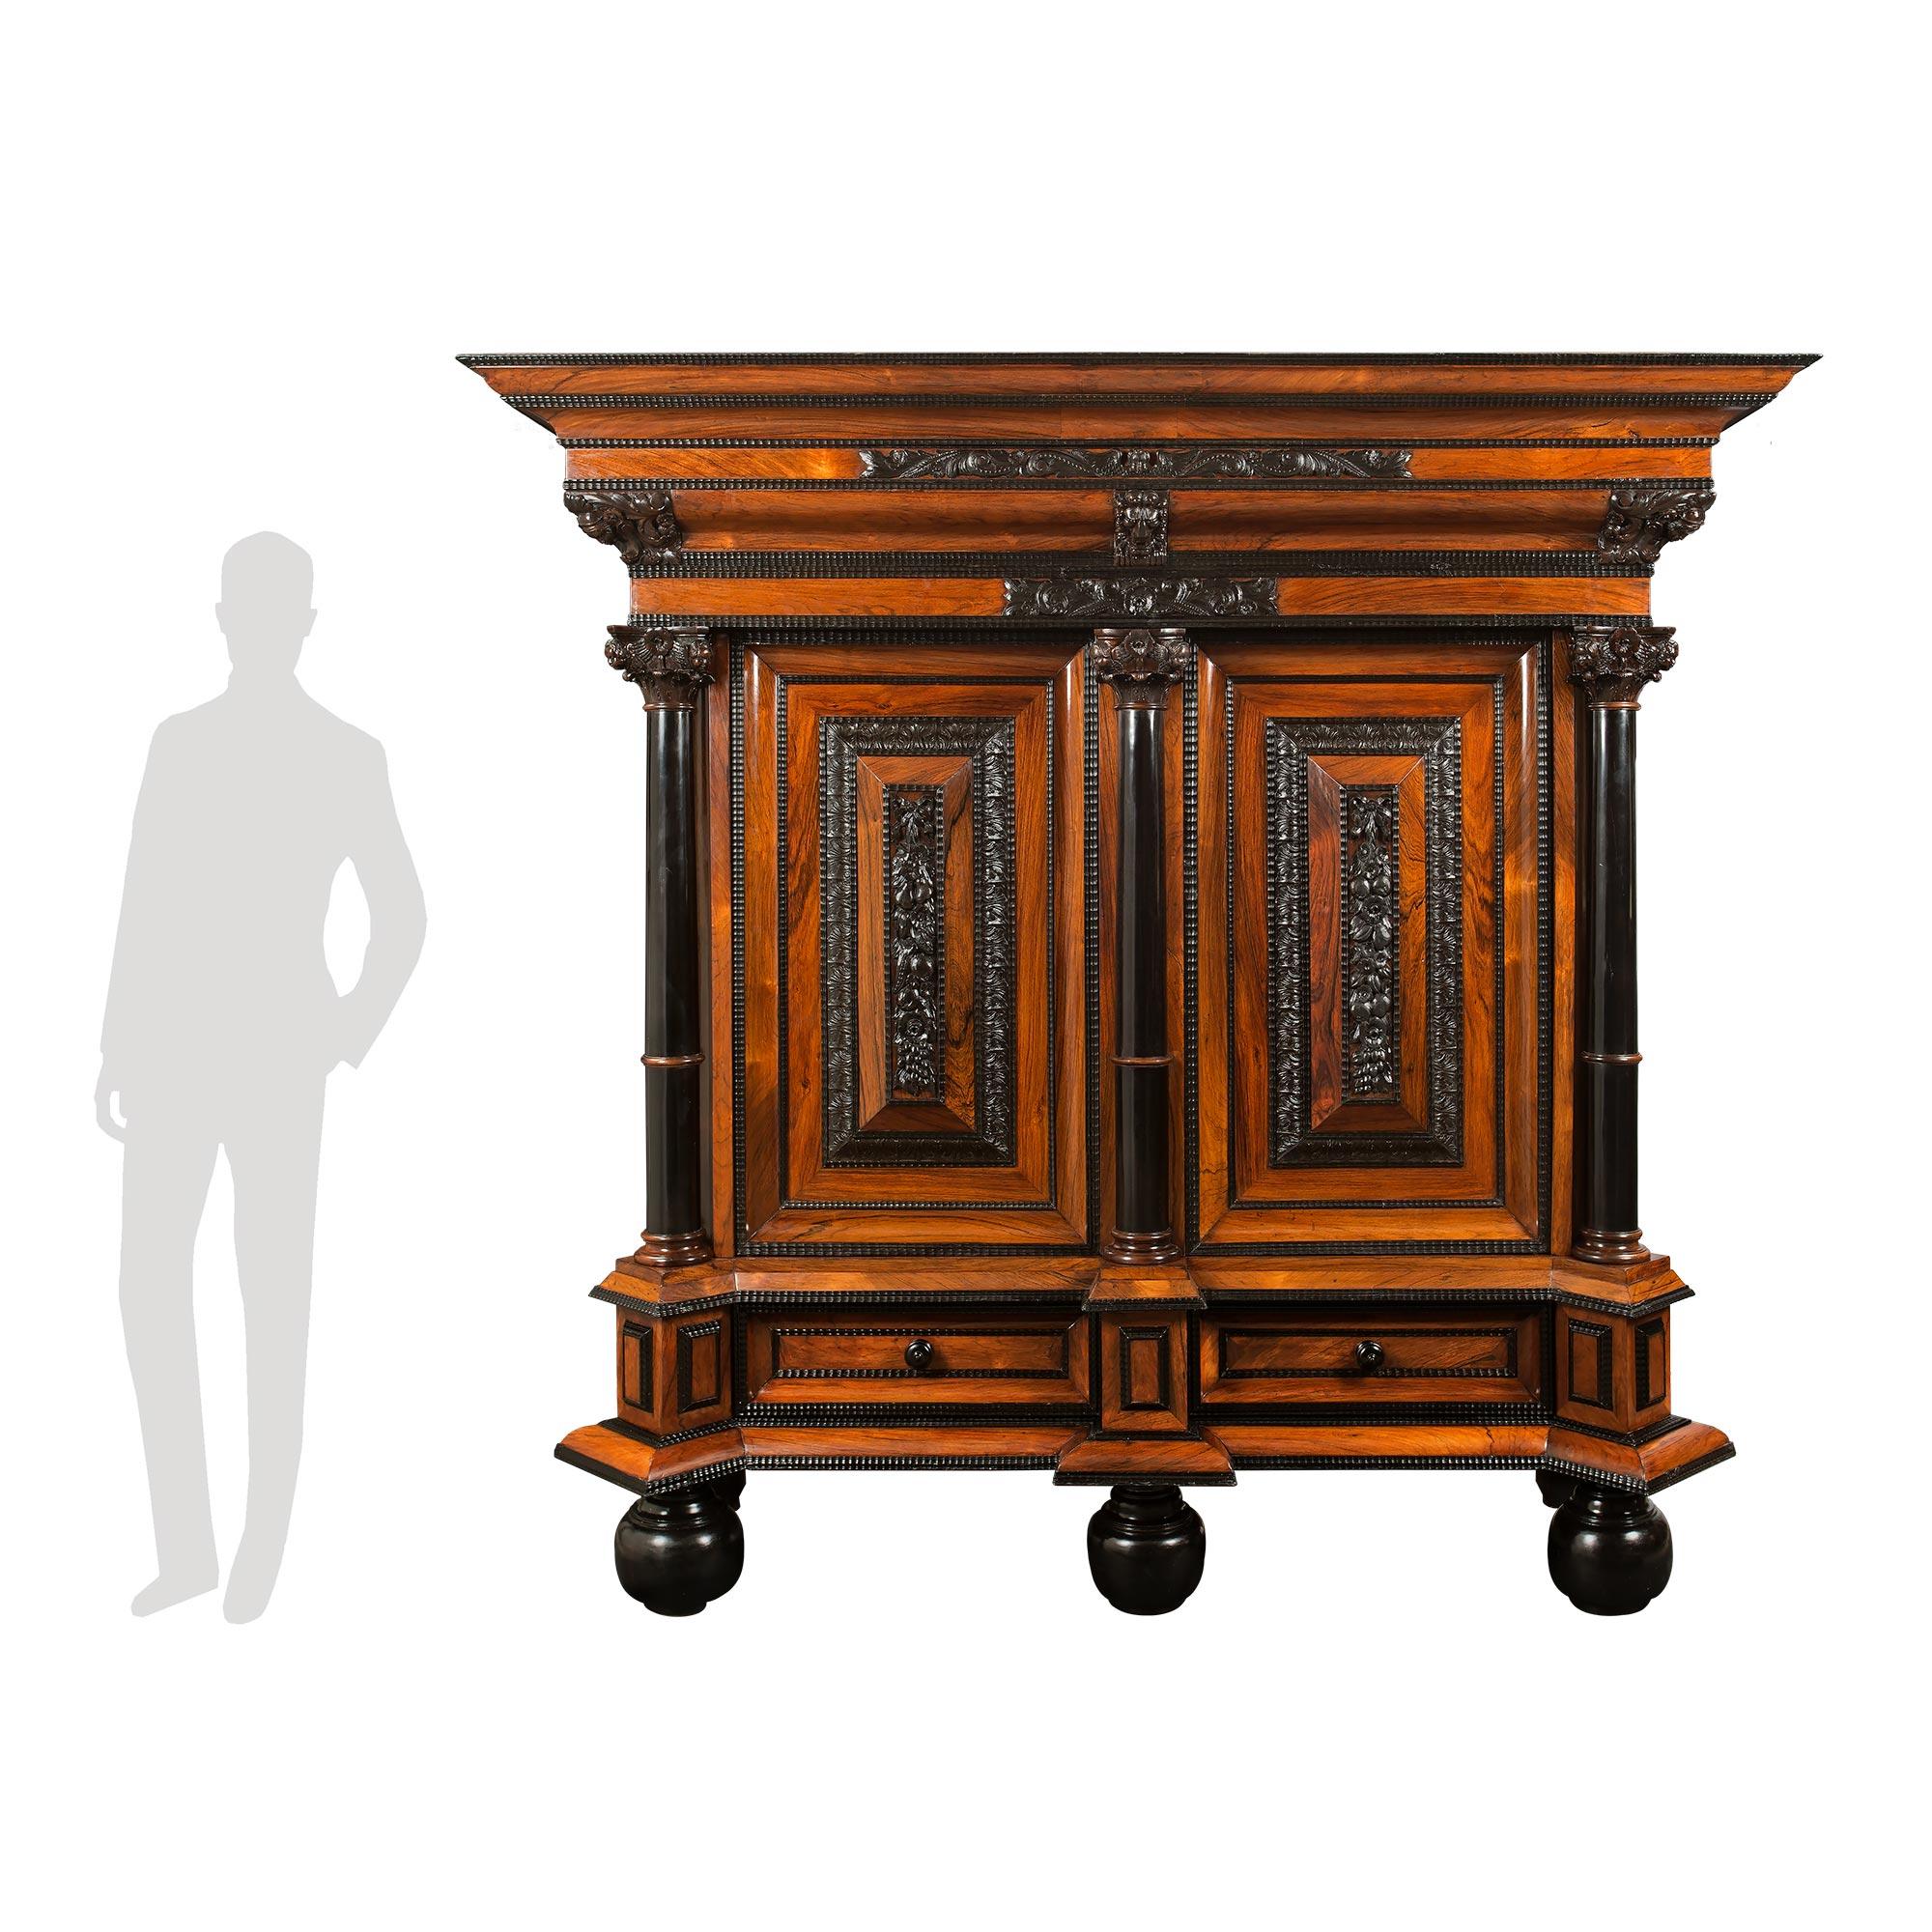 A monumental Dutch 19th century ‘Meubles à Coussins’ ebony and walnut Kussenkast. This most impressive cabinet is raised by bun feet below the dentil shaped frieze. At the bottom of cabinet is a wide drawer with original iron pulls. The raised